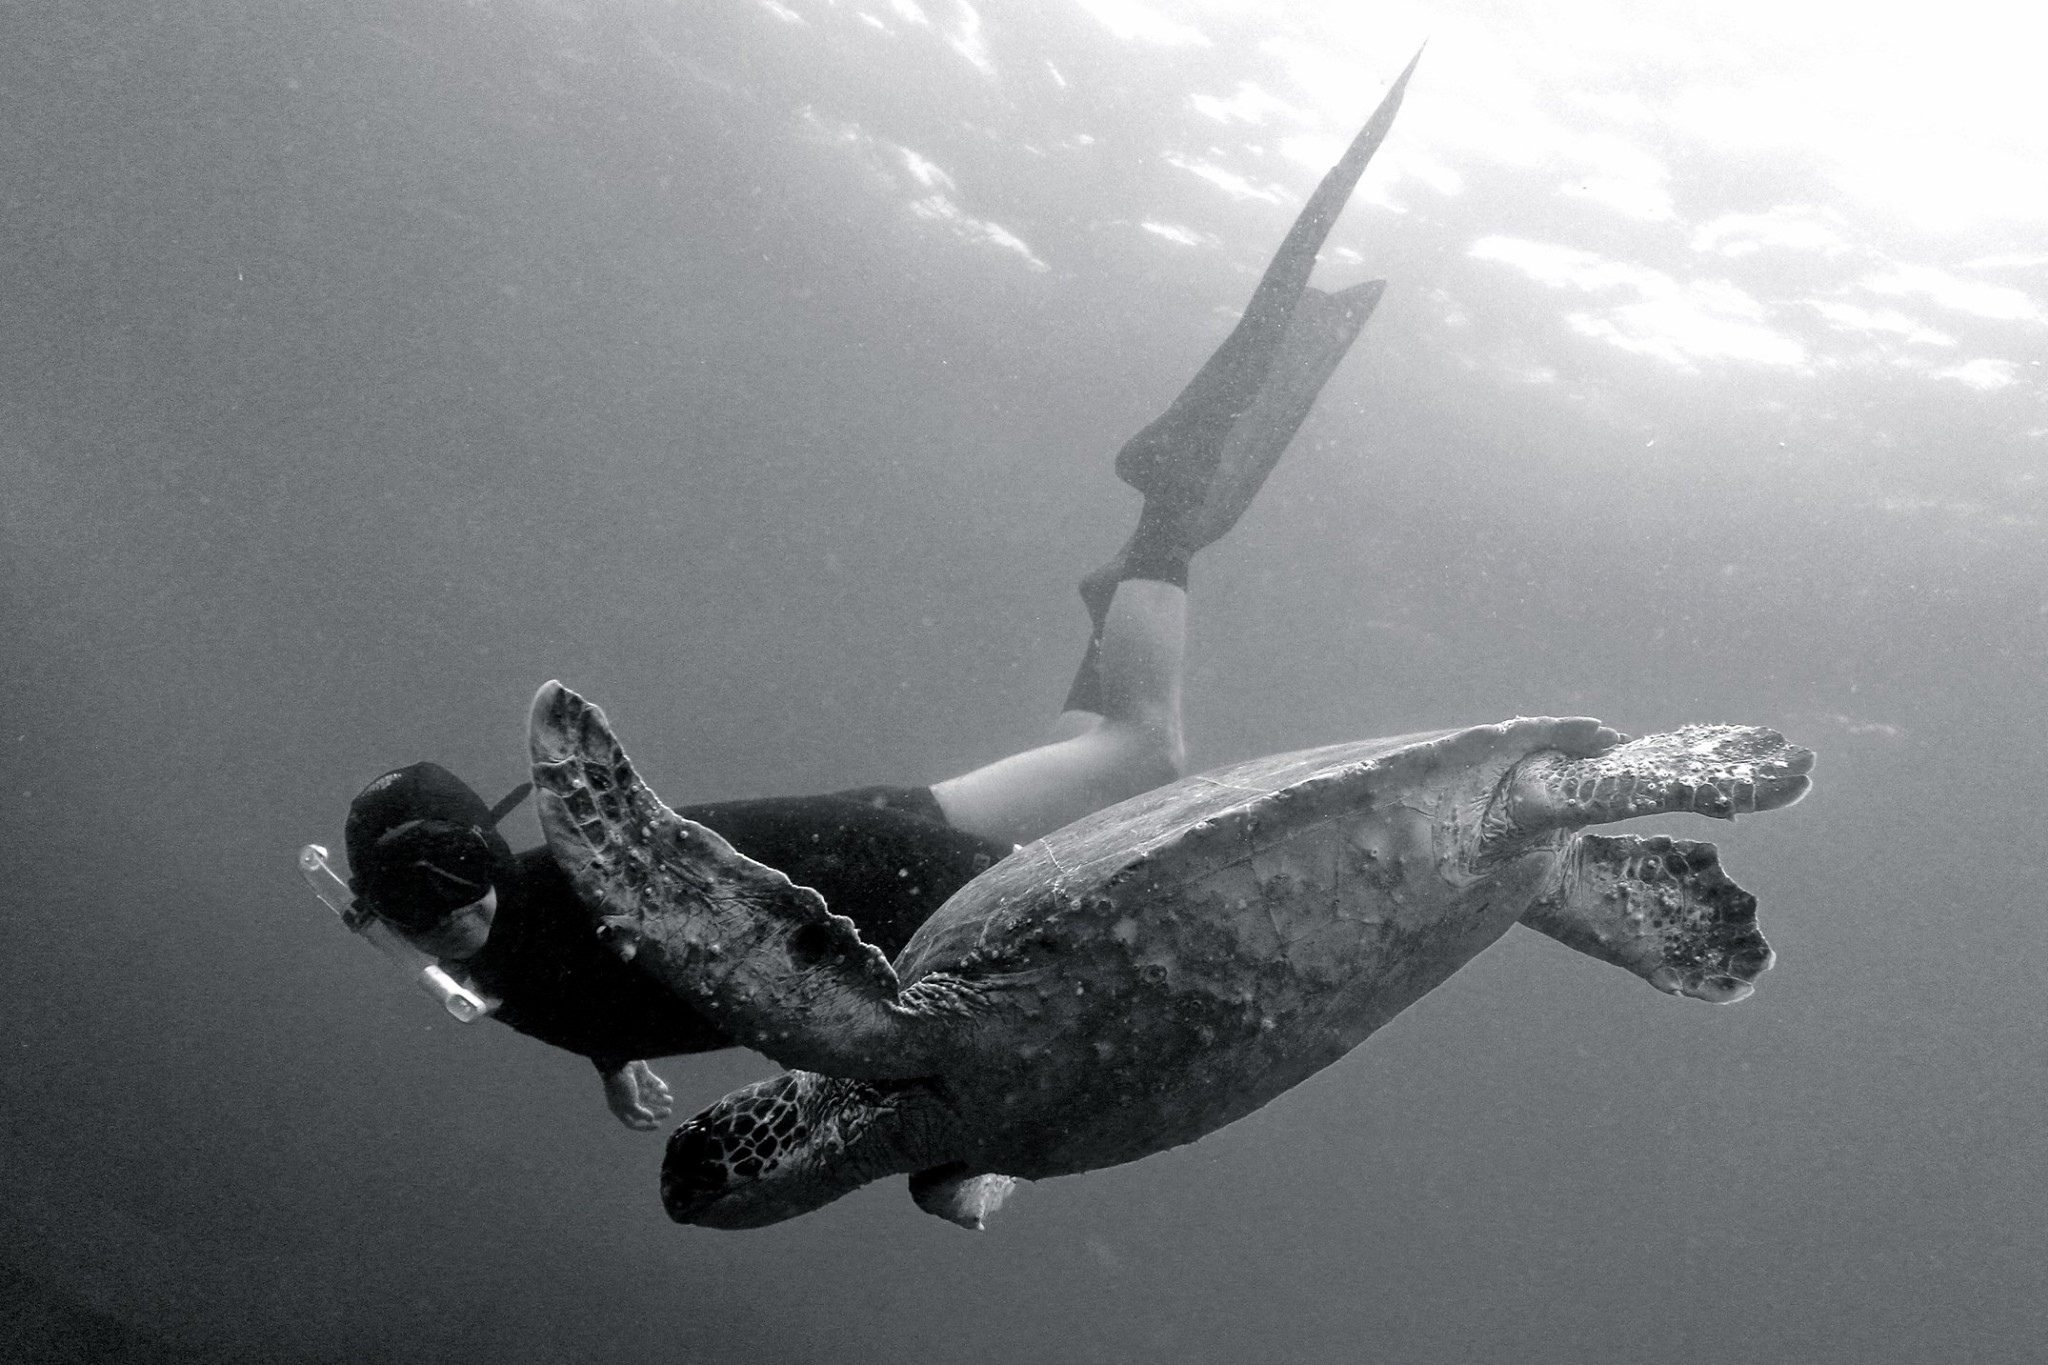 Hanging-with-a-turtle-at-Julian-Rocks-Marine-Sanctuary-photo-by-Nicole-Mclachlan